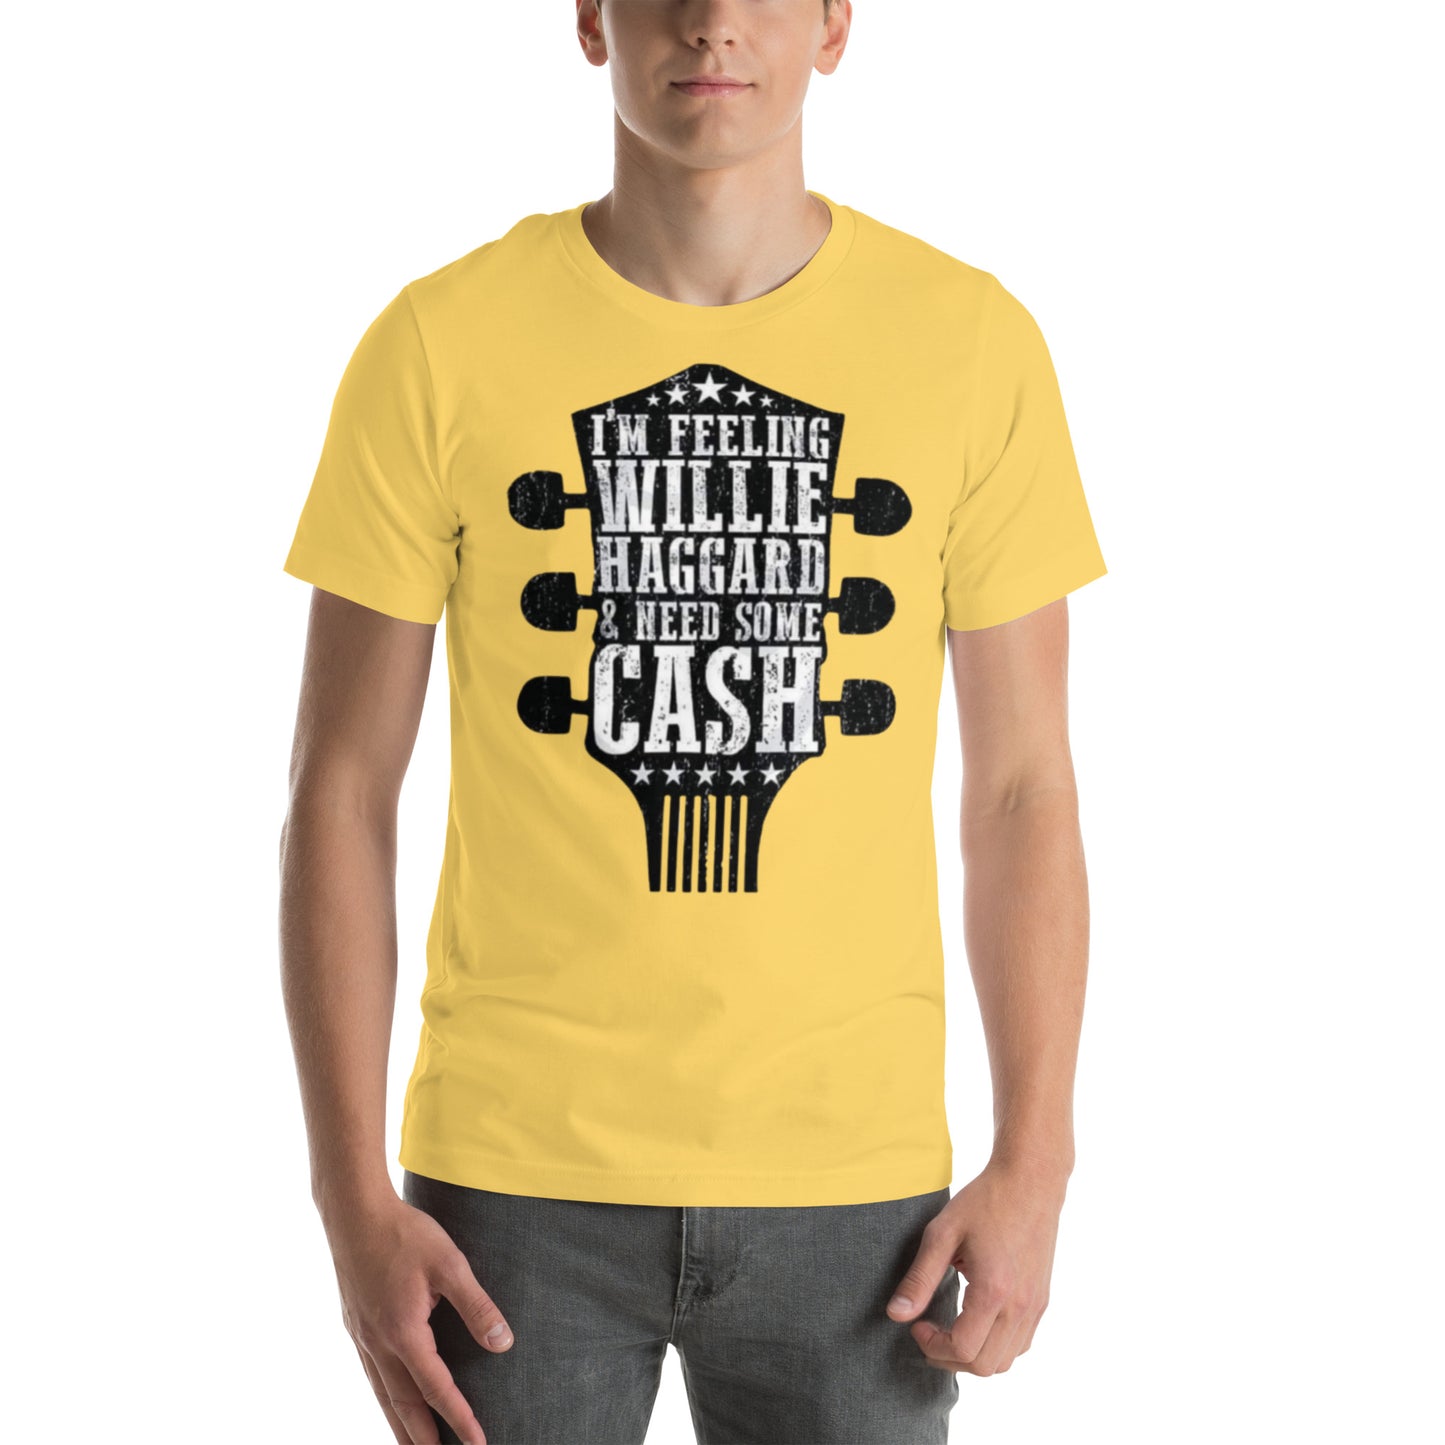 Willie Haggard - Classic Country Tees